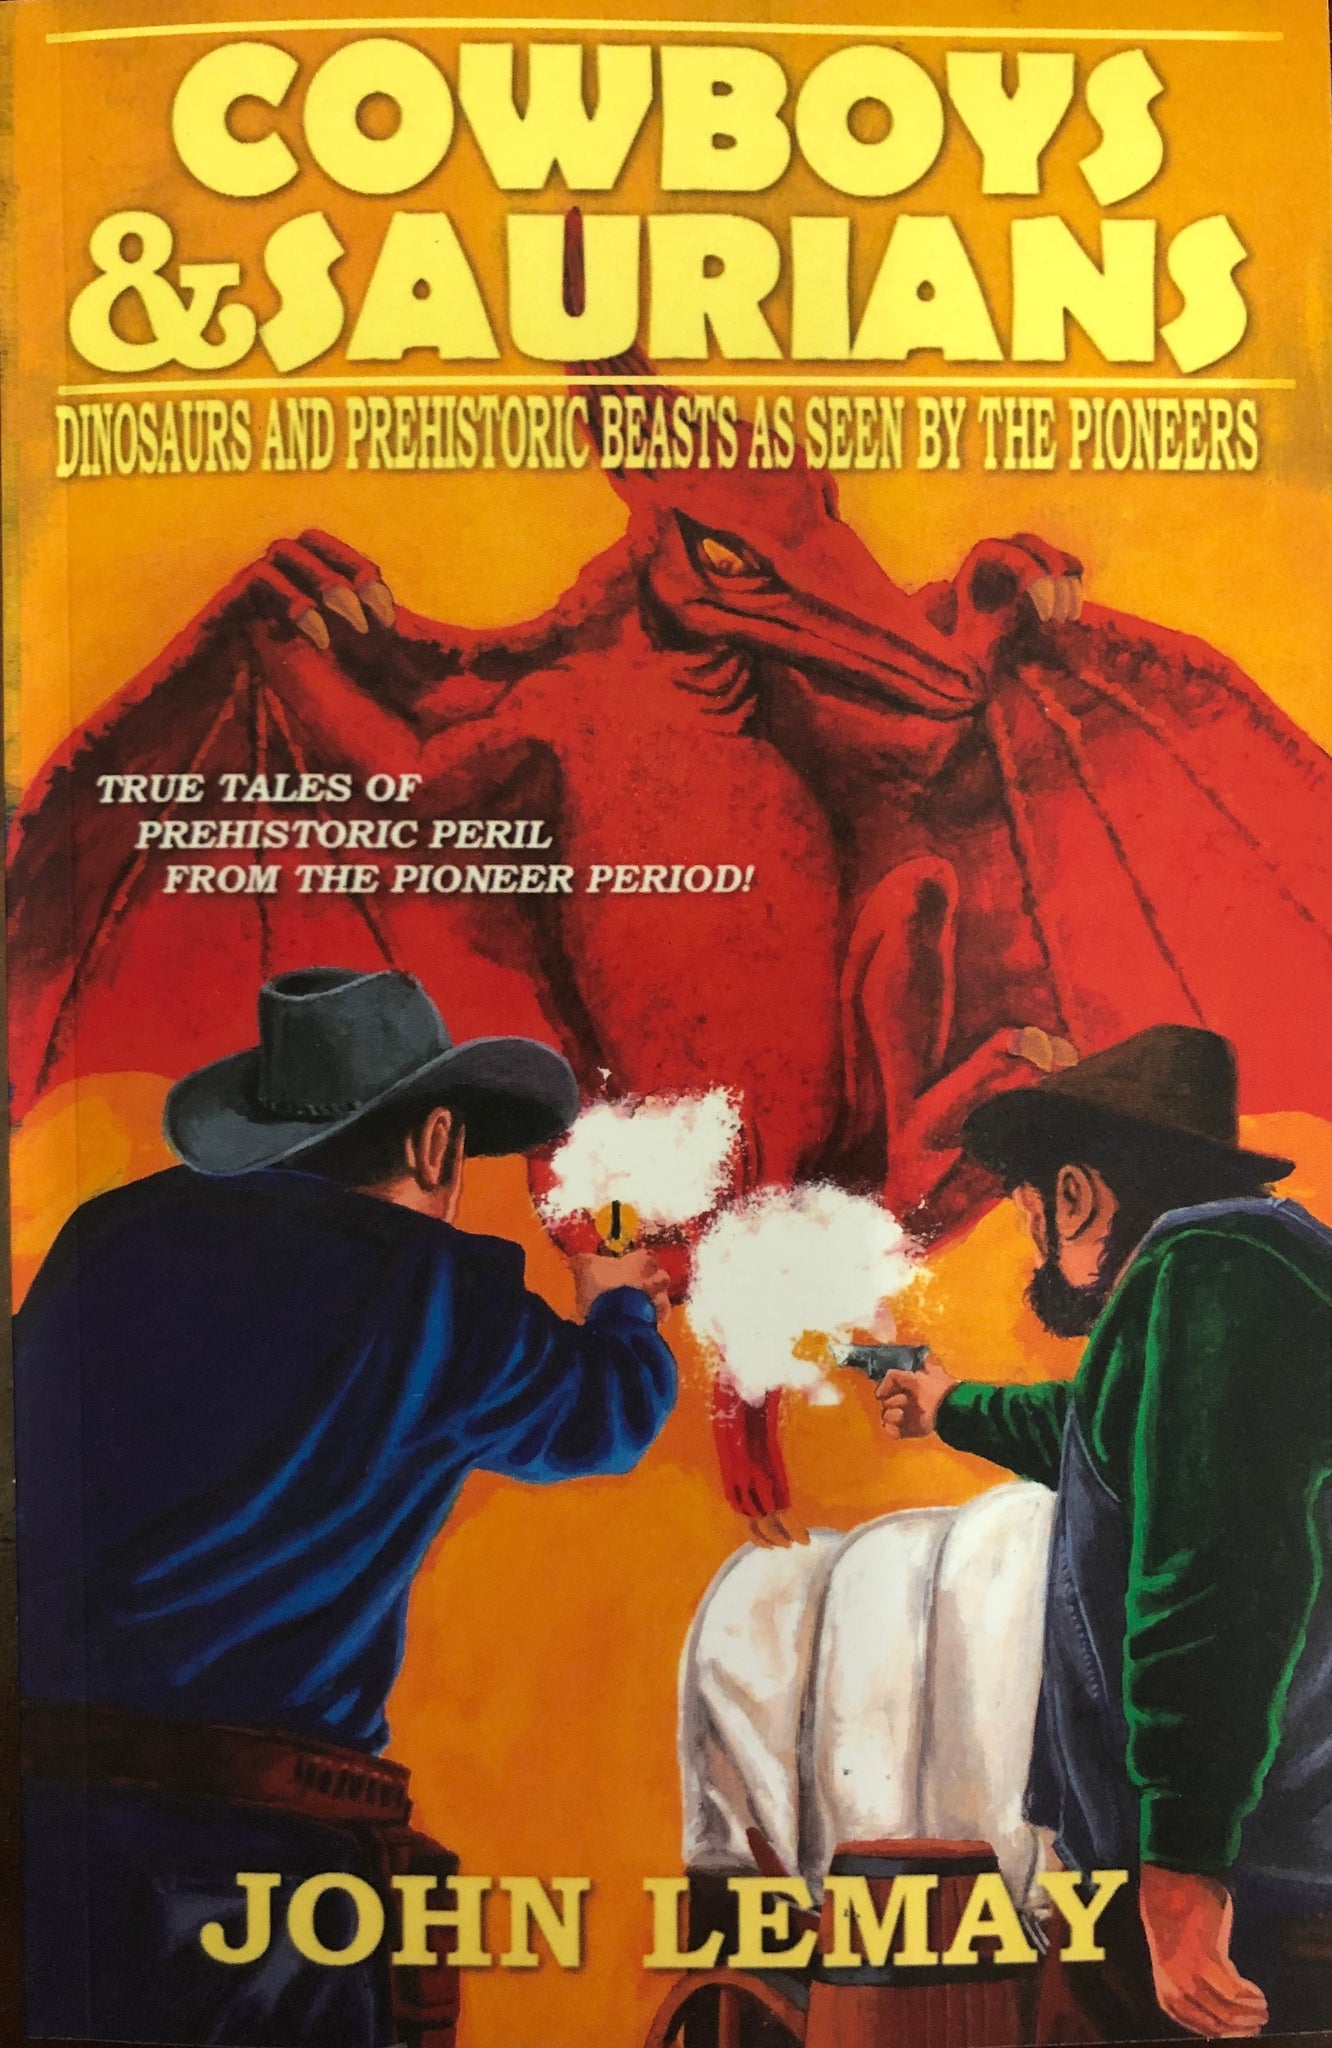 Cowboys & Saurians: Dinosaurs & Prehistoric Beasts As Seen by the Pioneers by John LeMay